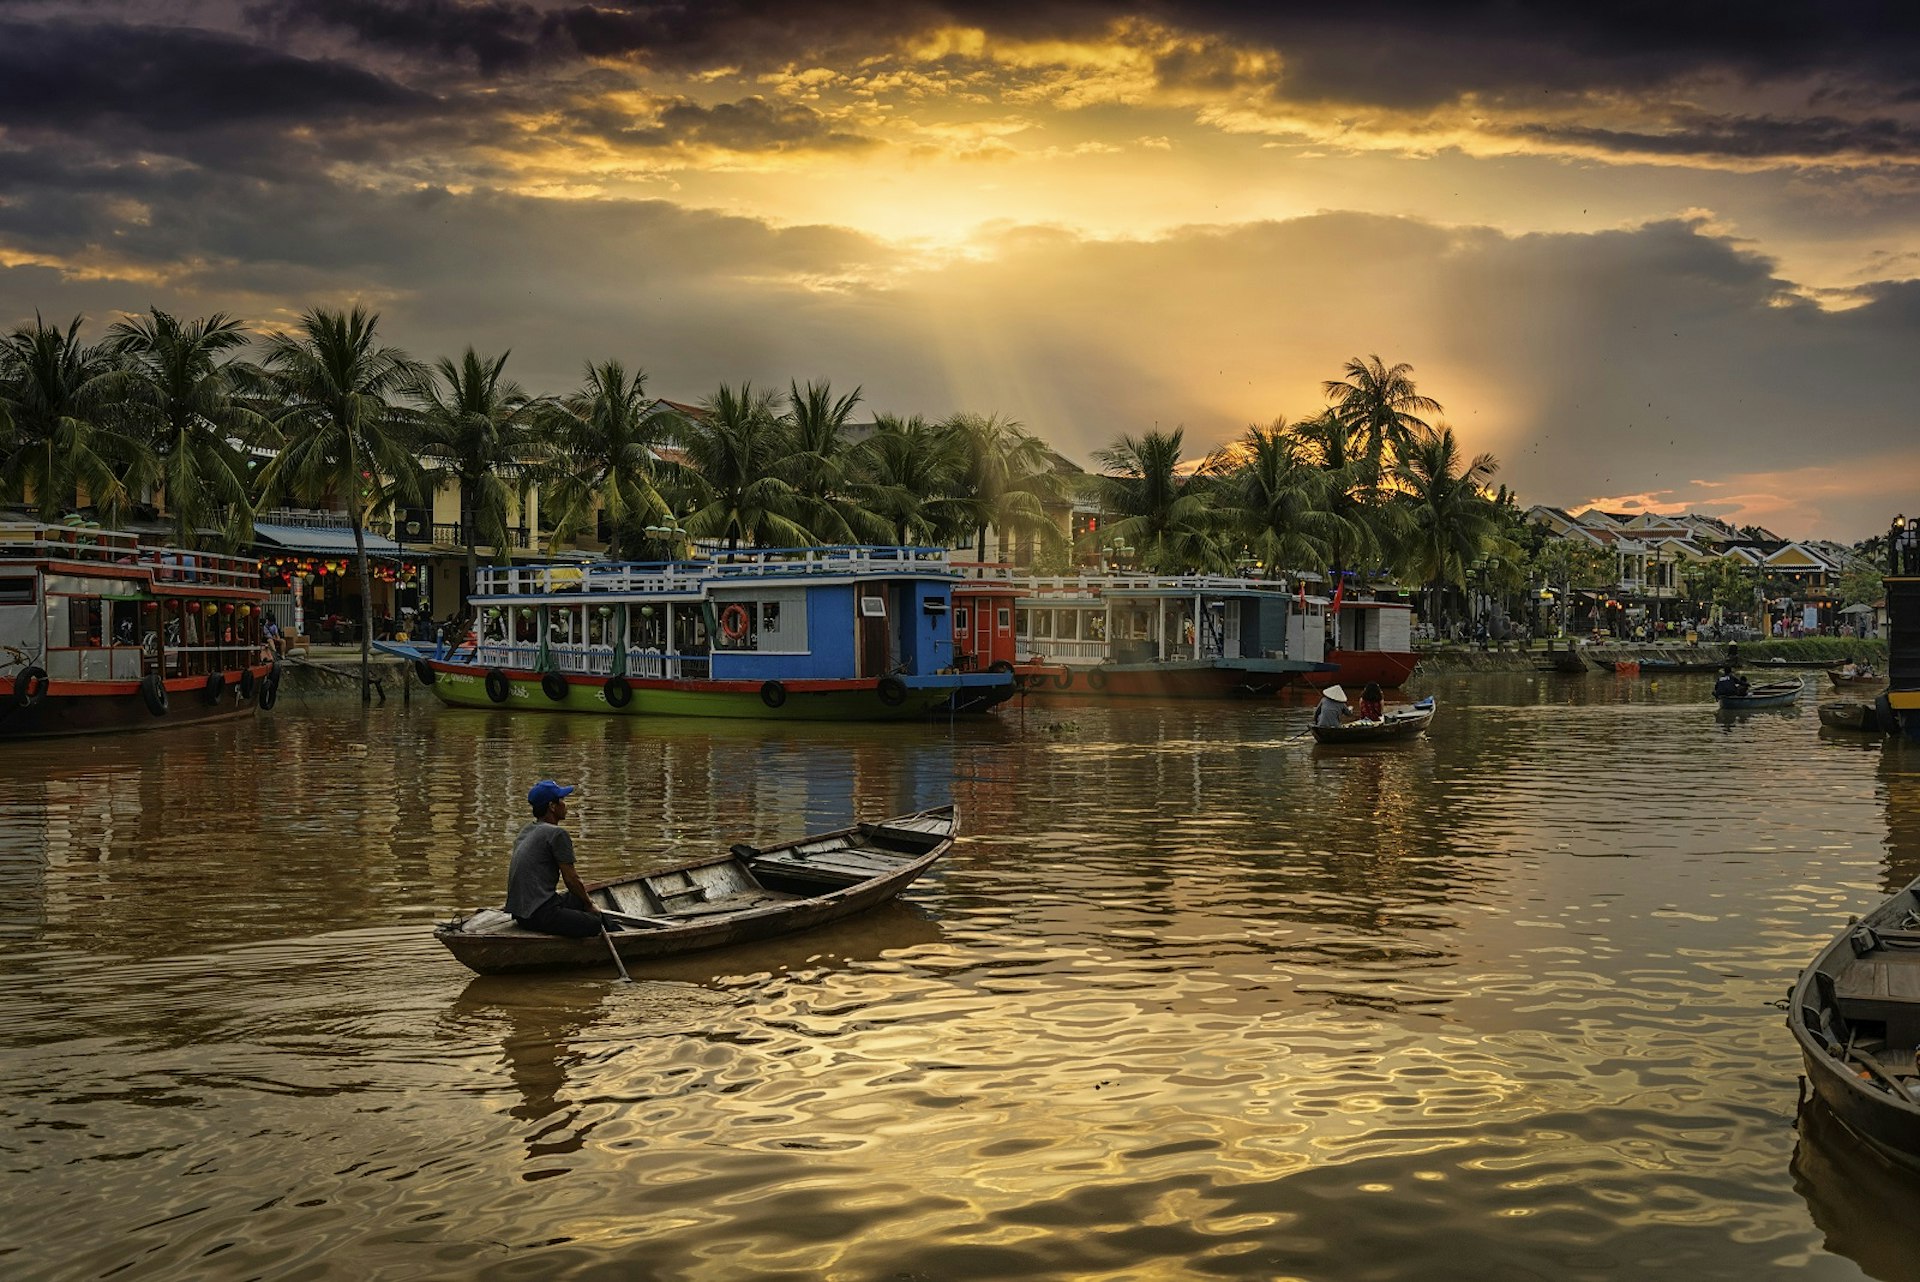 A few small wooden boats on the Thu Bon river with the sun setting over palm trees. There are big, colourful boats docked along the banks and restaurants beyond them. 